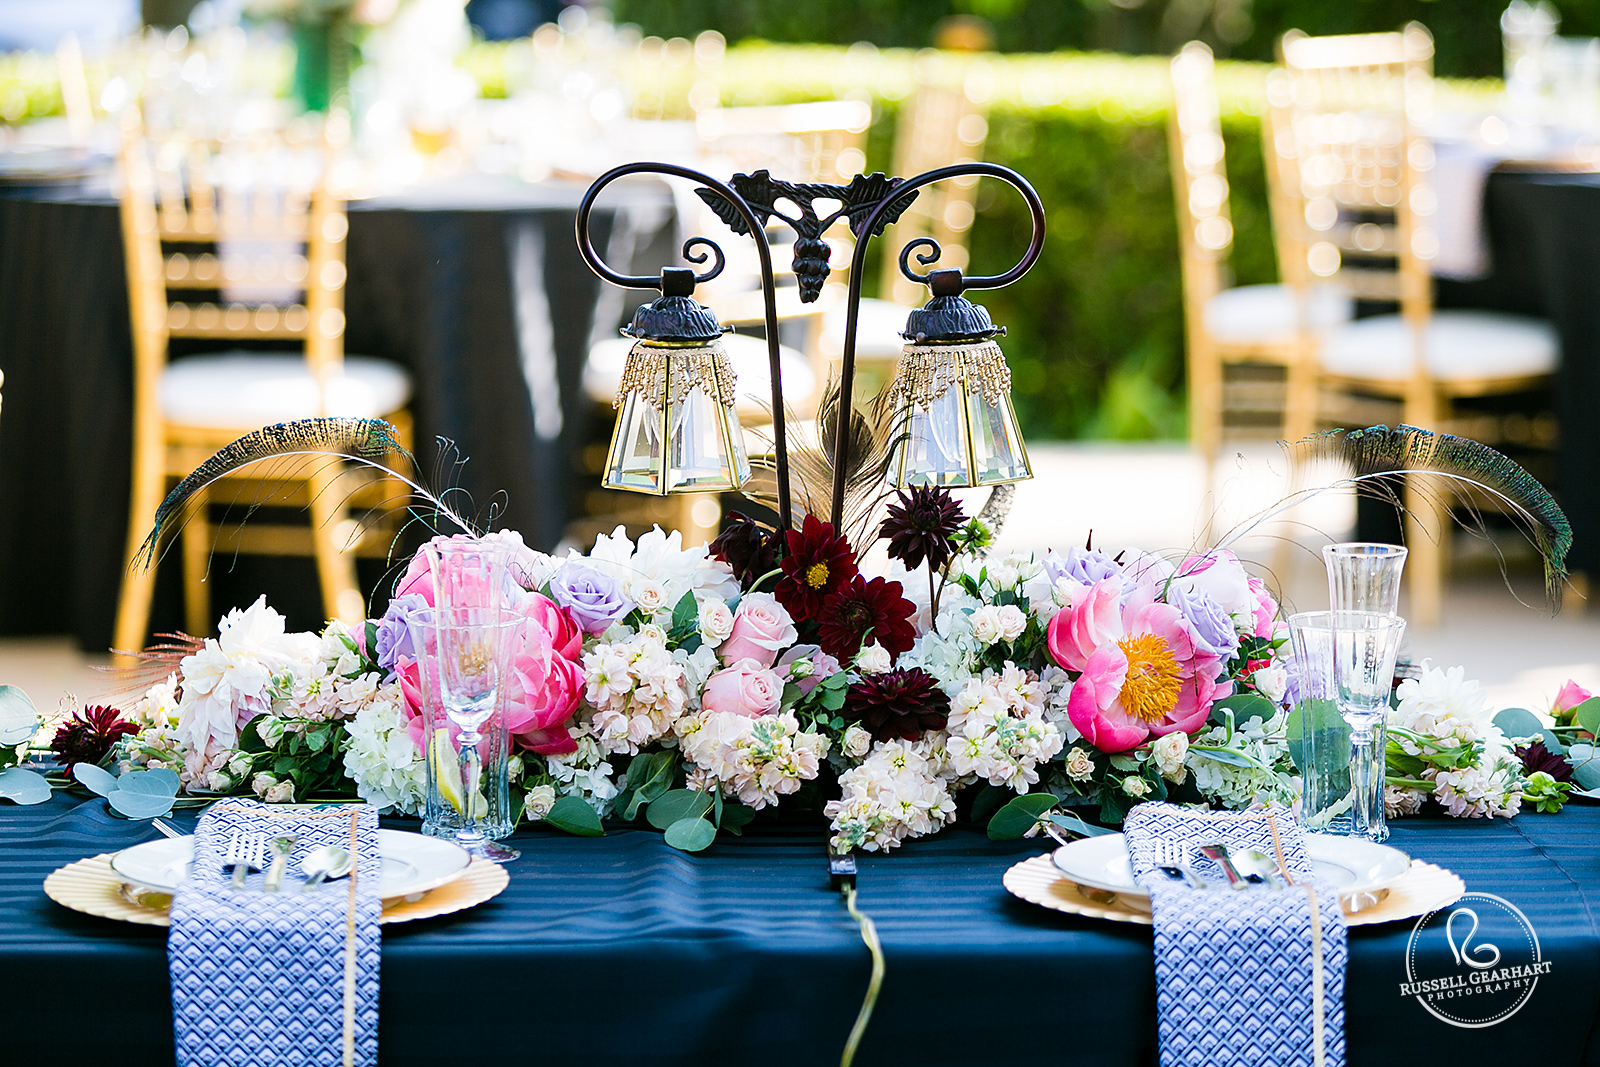 Wedding Head Table Centerpiece with Art Nouveau Lamp - Wedding Sparkler Matches as Guest Favors - Roaring Twenties Wedding – Russell Gearhart Photography – www.gearhartphoto.com 